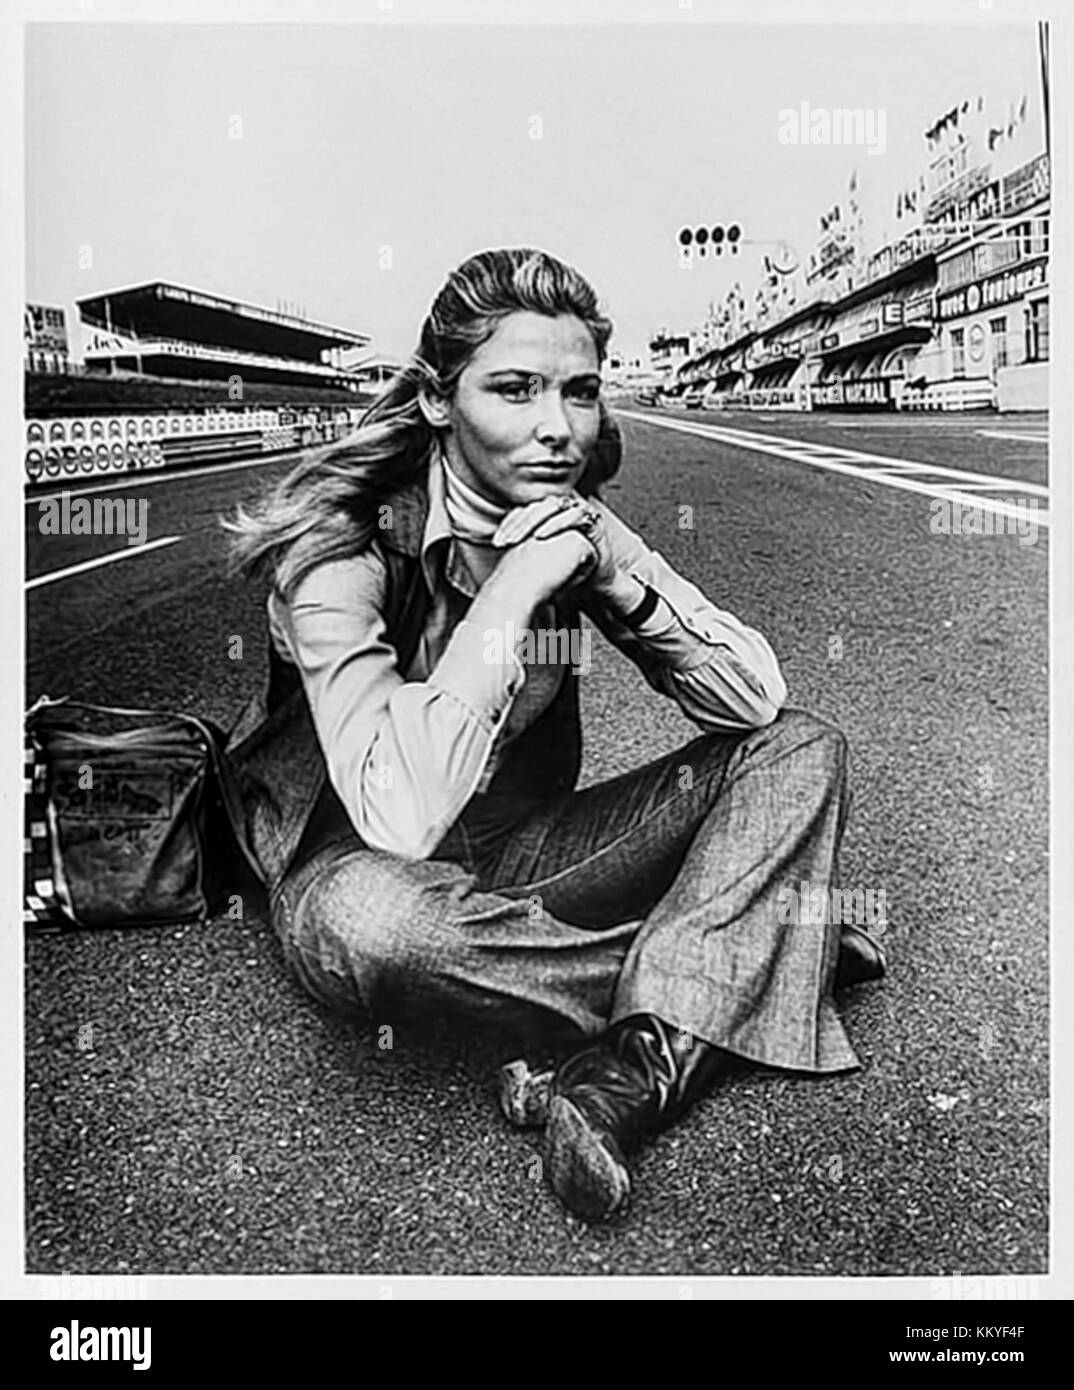 Elga Andersen as widow Lisa Belgetti on the Circuit de la Sarthe during the filming of ‘Le Mans’ (1971) directed by Lee H. Katzin and starring Steve McQueen. Stock Photo